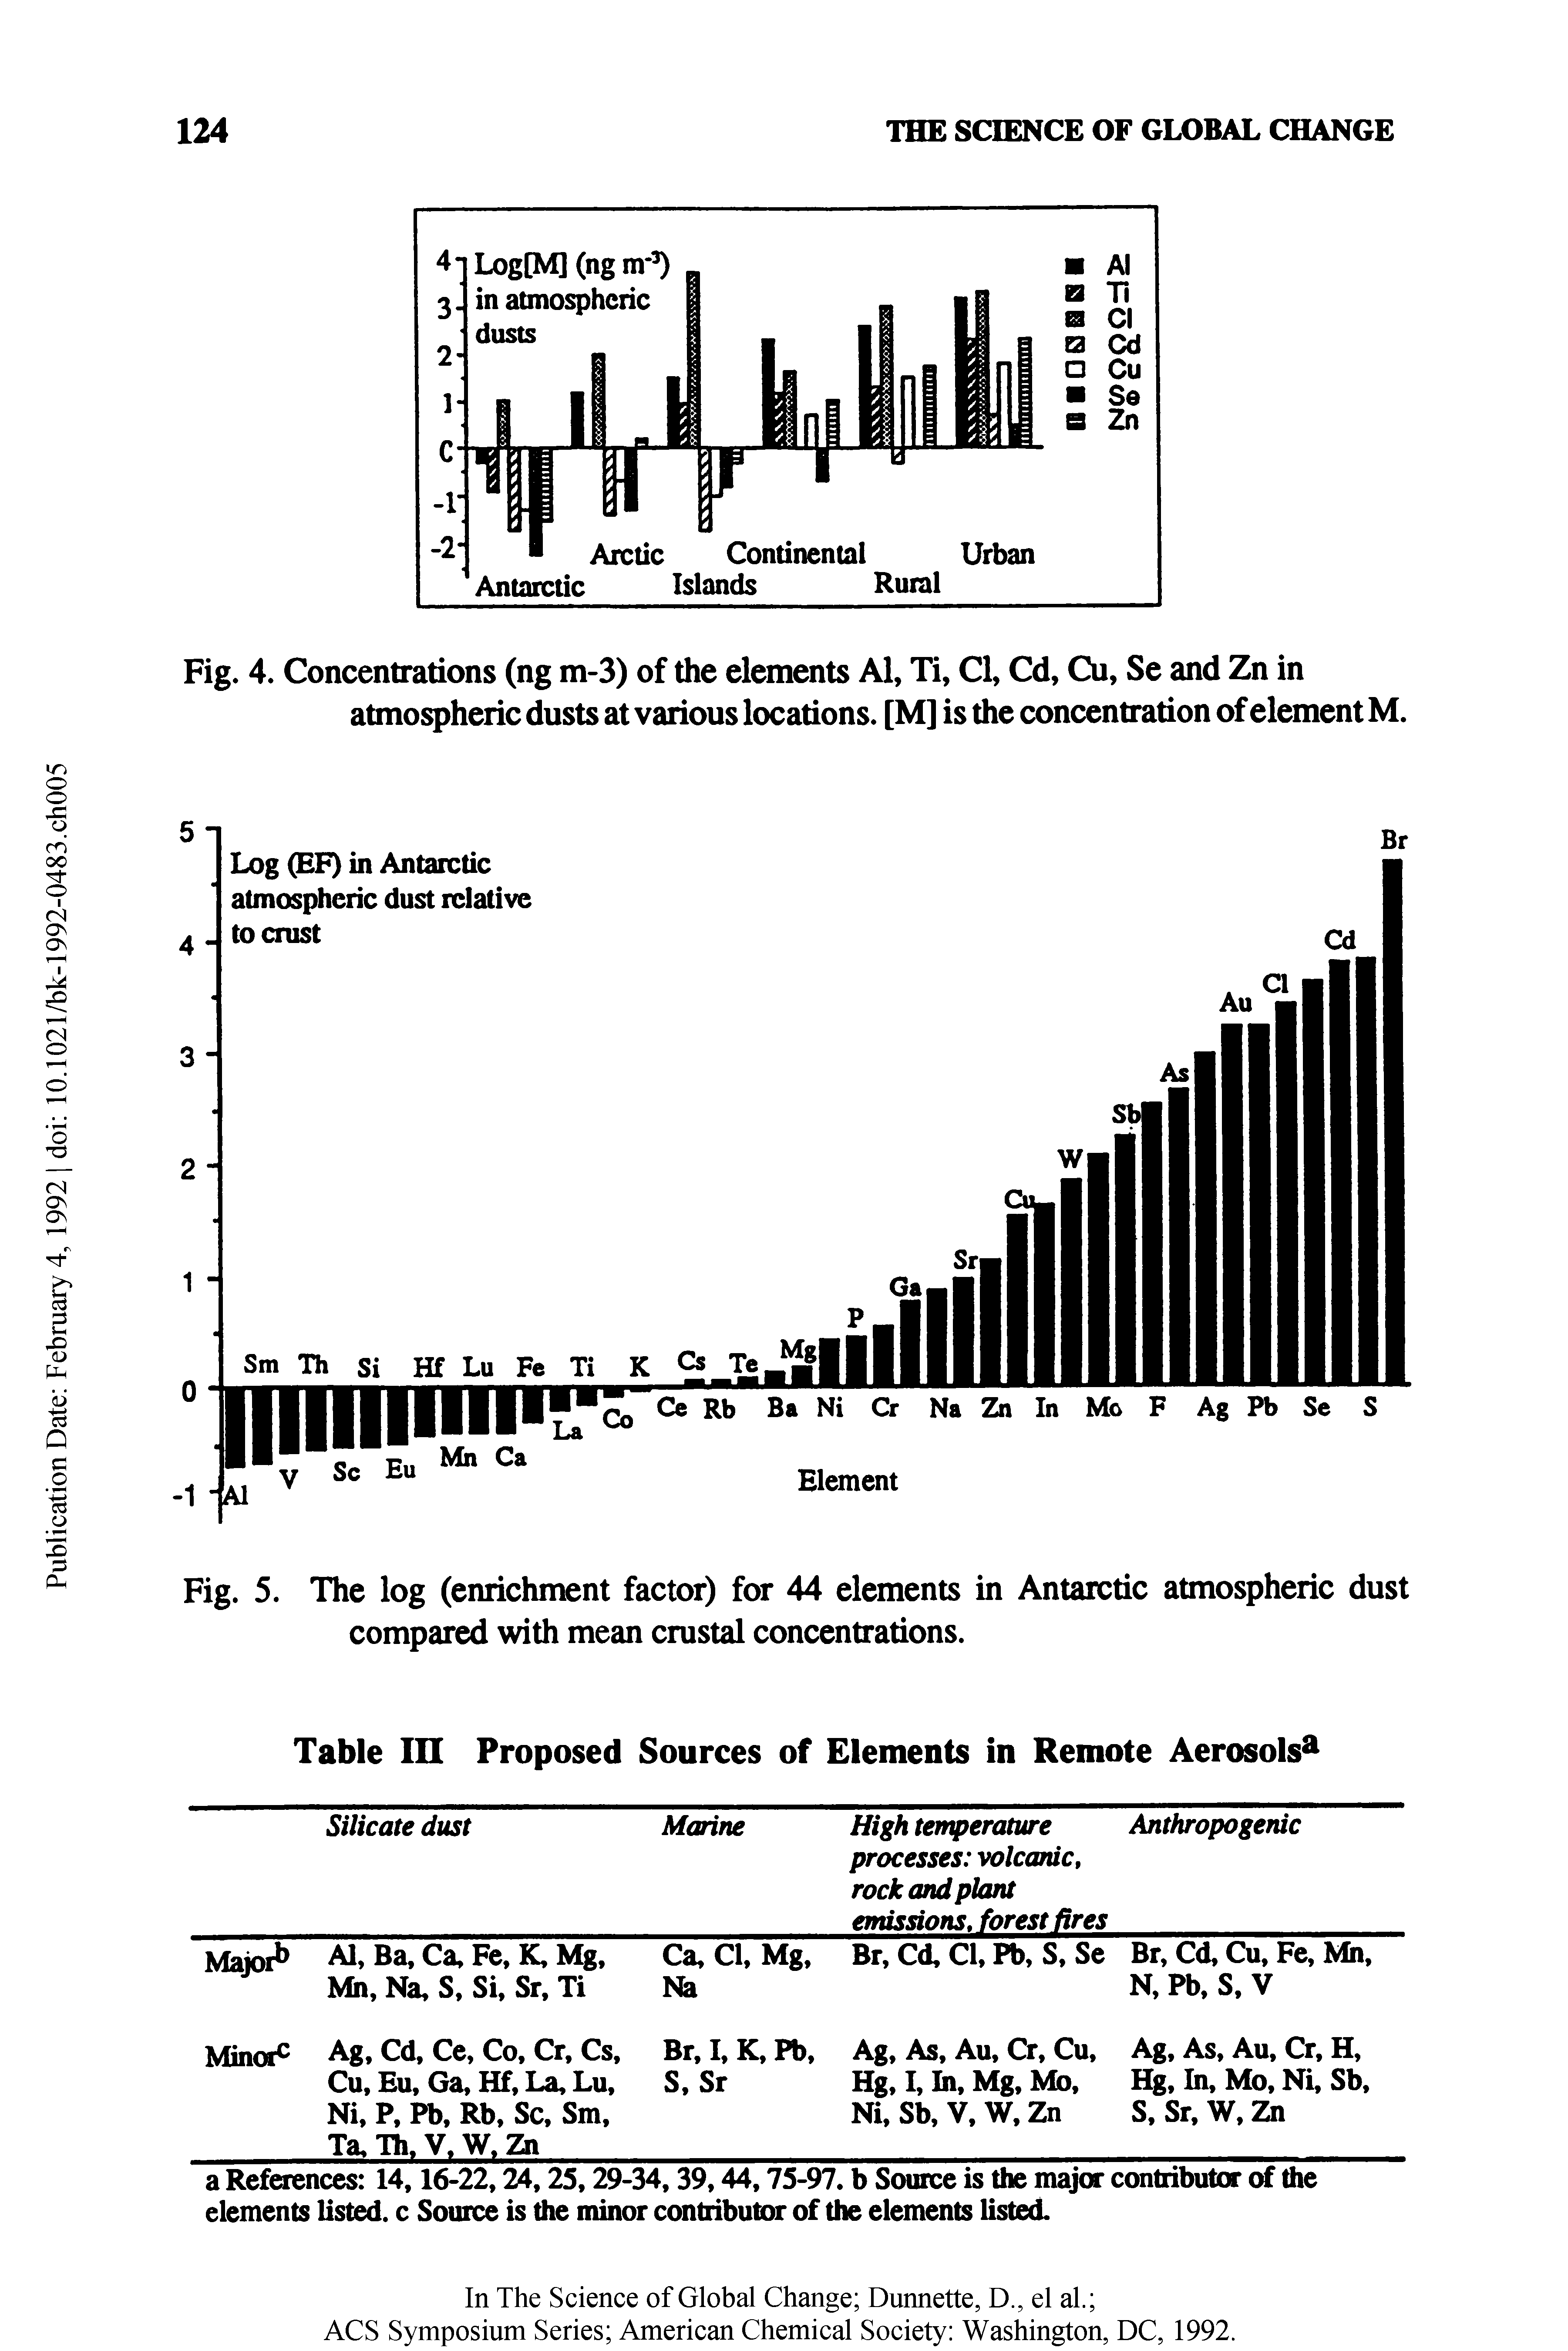 Fig. 5. The log (enrichment factor) for 44 elements in Antarctic atmospheric dust compared with mean crustal concentrations.